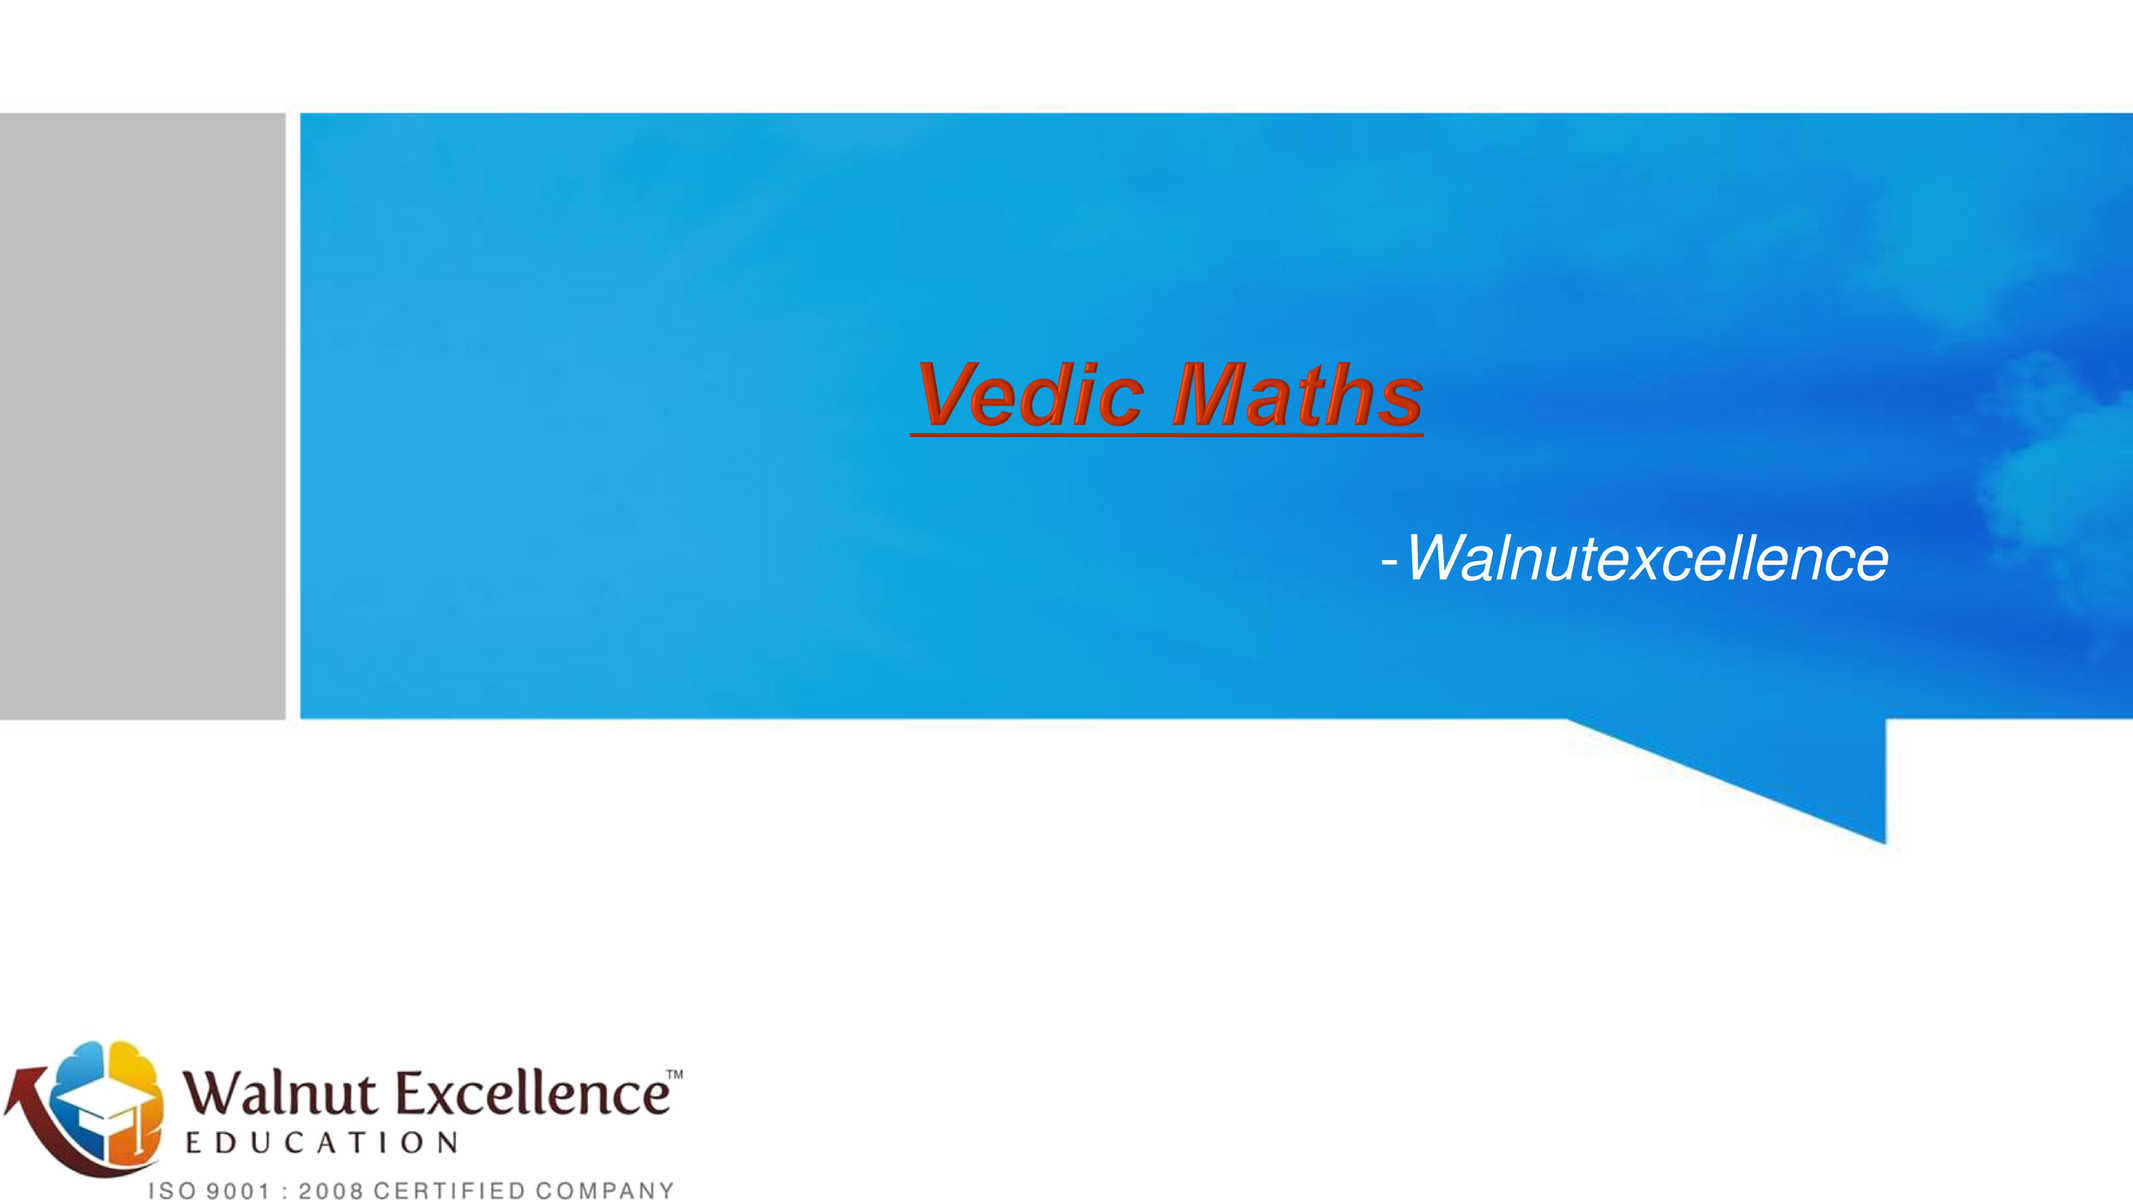 walnutexcellence-learn-vedic-maths-page-1-created-with-publitas